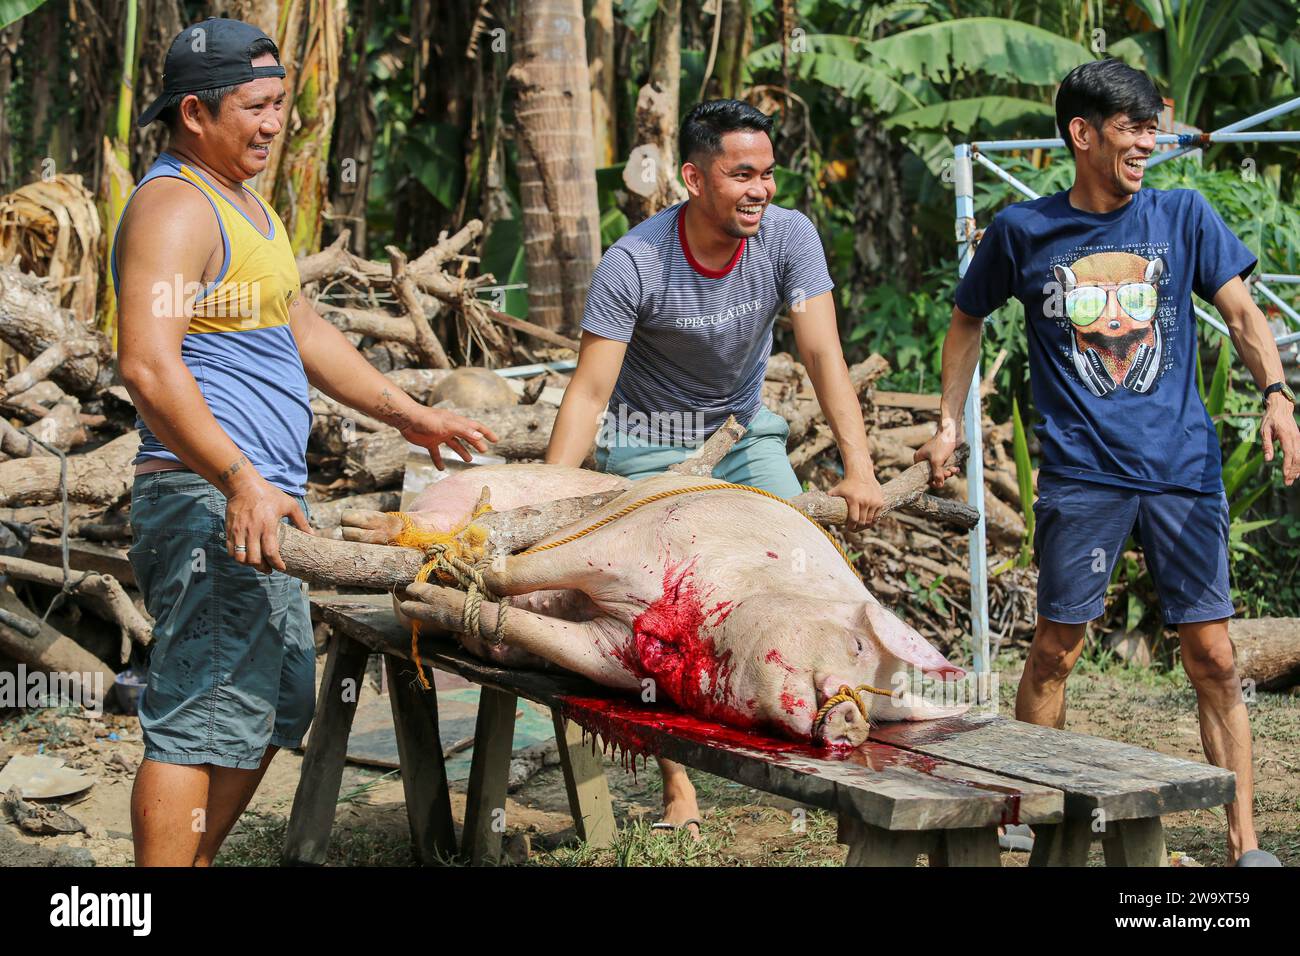 San Jose del Monte, Philippines. December 31, 2023: Traditional pig slaughtering for New Year's Eve celebrations amidst palm trees. At the northeast portion of over-urbanized Manila, the Philippine rural life is regaining its rights and home-made swine slaughter is a common practice, far from industrial standards or animal welfare. Full of superstitions (no chicken/fish), Filipino families will have to wait midnight to gather for Media Noche, a festive loud dinner that lasts until morning and celebrate the end of world's longest Christmas and holiday season.Credit: Kevin Izorce/Alamy Live News Stock Photo